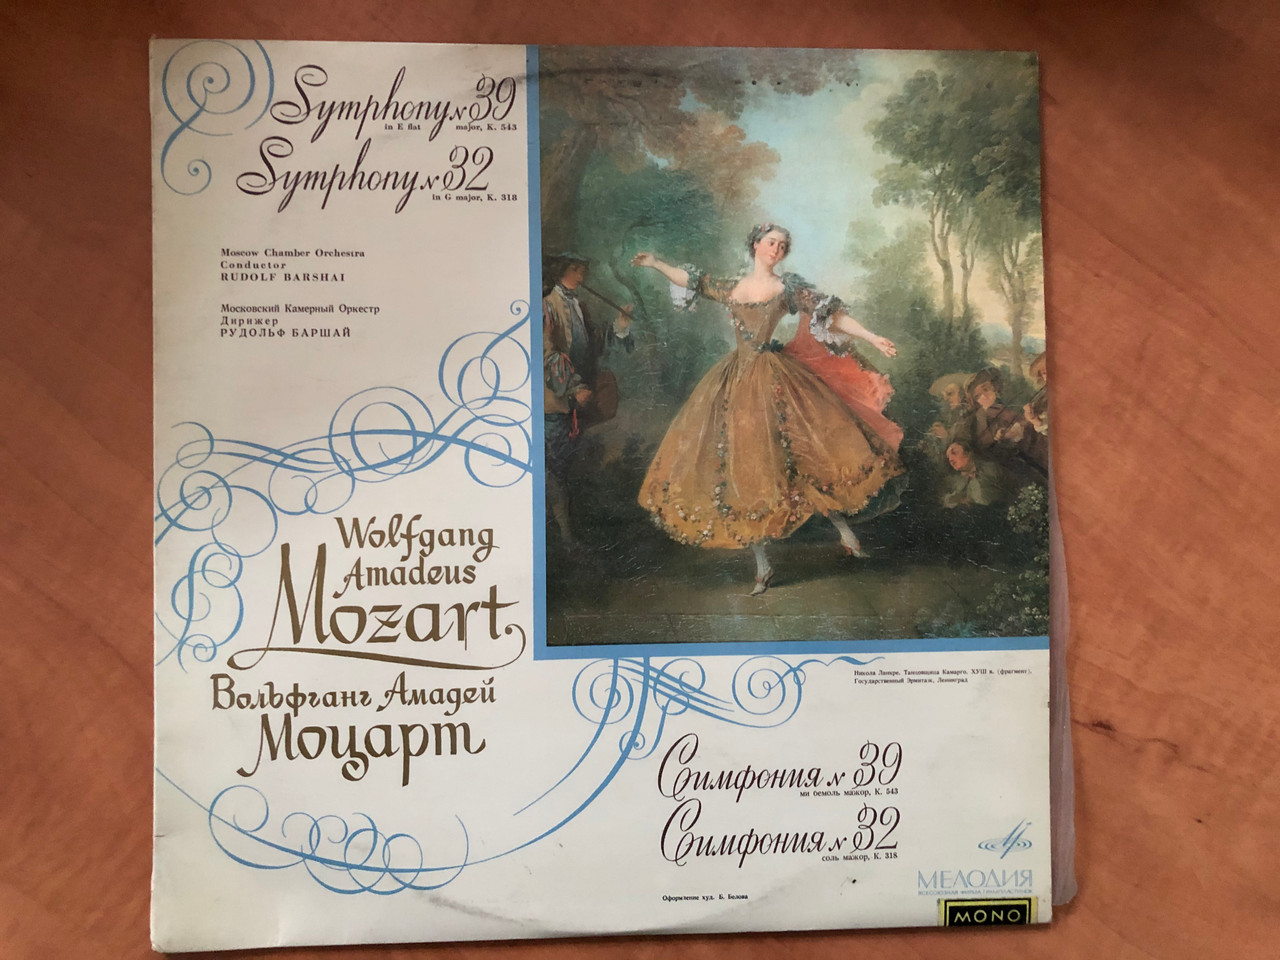 https://cdn10.bigcommerce.com/s-62bdpkt7pb/products/30814/images/181901/Wolfgang_Amadeus_Mozart_-_Symphony_N_39_In_E_Flat_Major_K._543_Symphony_N_32_In_G_Major_K._318_Moscow_Chamber_Orchestra_Conductor_Rudolf_Barshai_LP_Stereo_C_01699-700_1__57459.1623962468.1280.1280.JPG?c=2